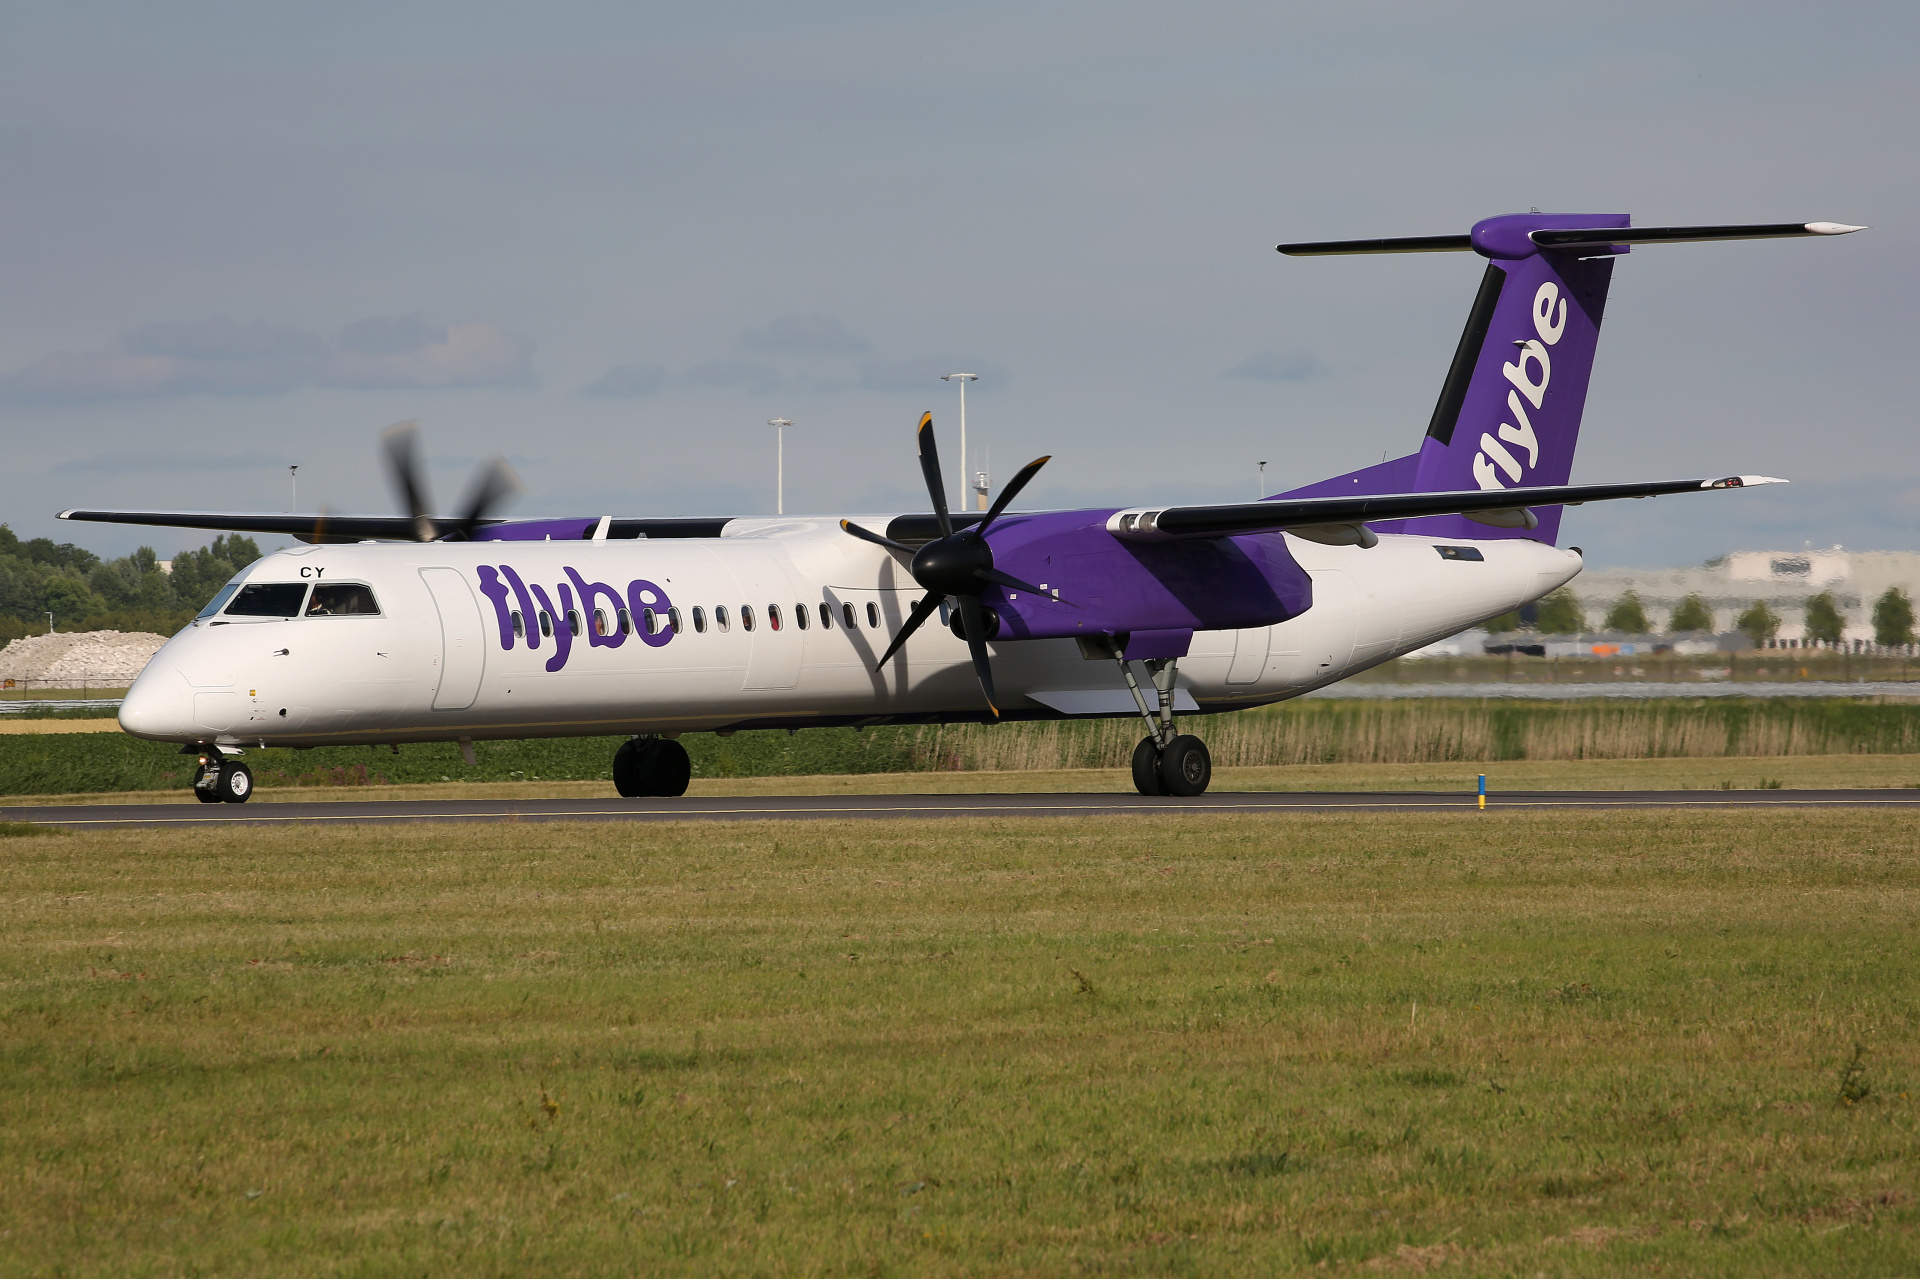 G-JECY (new livery) (Aircraft » Schiphol Spotting » Bombardier Q400 Dash 8 » FlyBe)